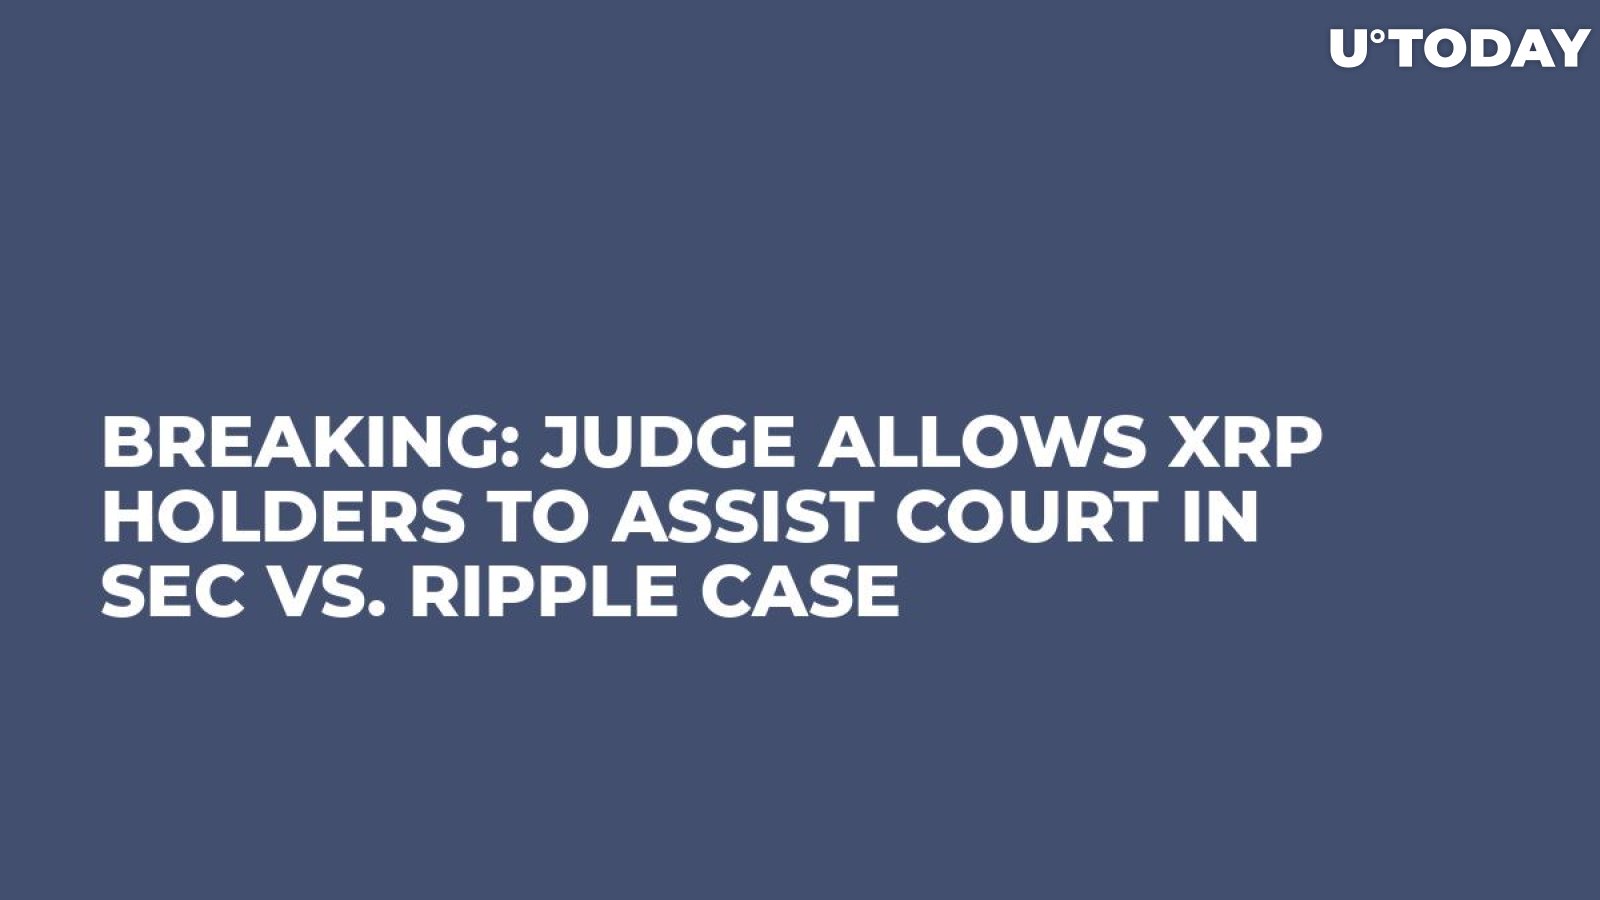 BREAKING: Judge Allows XRP Holders to Assist Court in SEC vs. Ripple Case